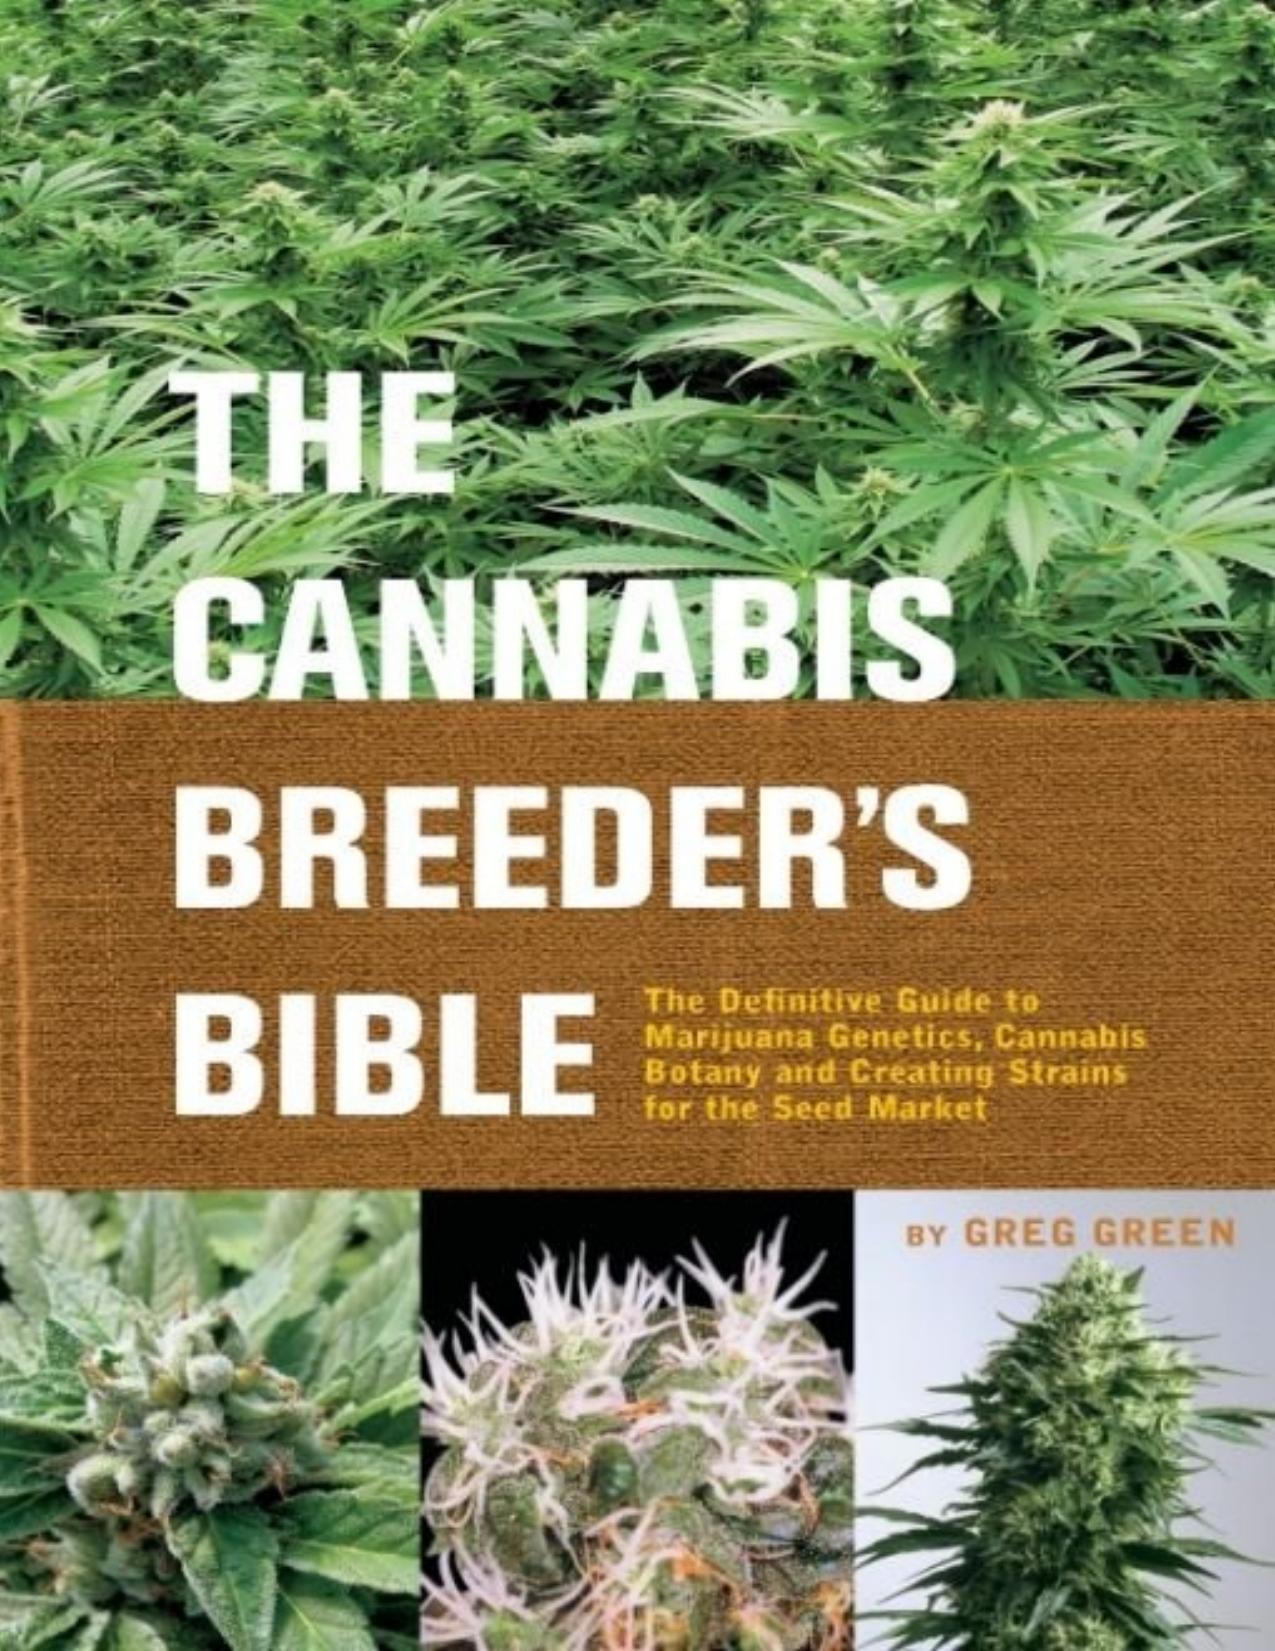 The Cannabis Breeder\'s Bible: The Definitive Guide to Marijuana Genetics, Cannabis Botany and Creating Strains for the Seed Market - PDFDrive.com